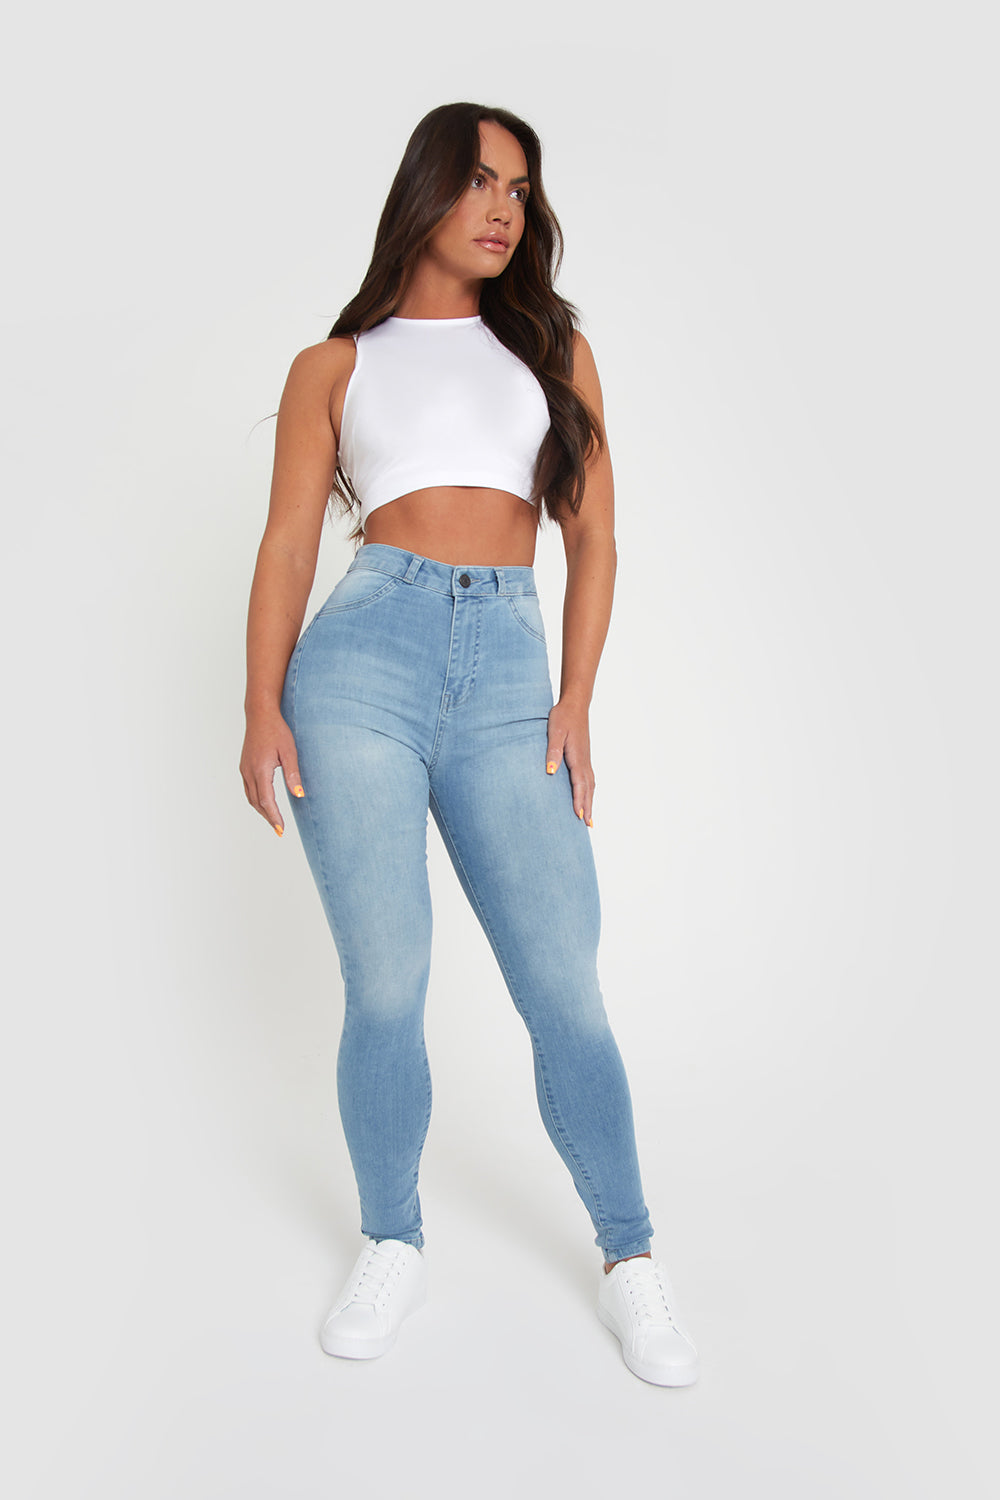 20 Best High Rise Jeans Outfit Ideas – Cute High Waisted Jeans Outfit